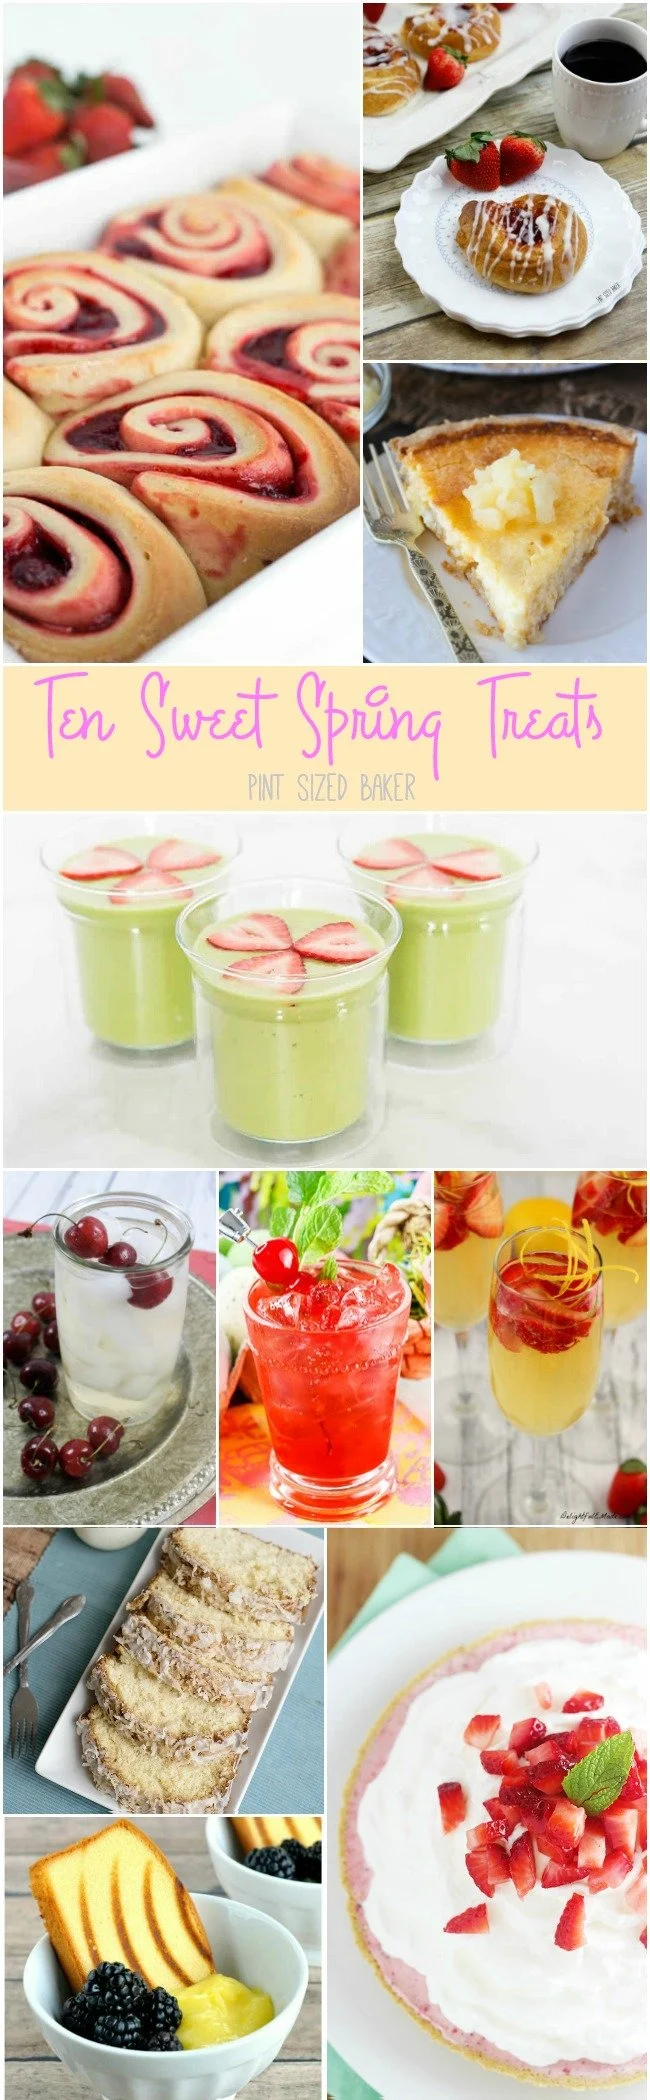 Spring time calls for fresh fruit bursting with flavor. Here's Ten Sweet Spring Treats that are full of strawberries, lemons, cherries and more! Taste the rainbow!